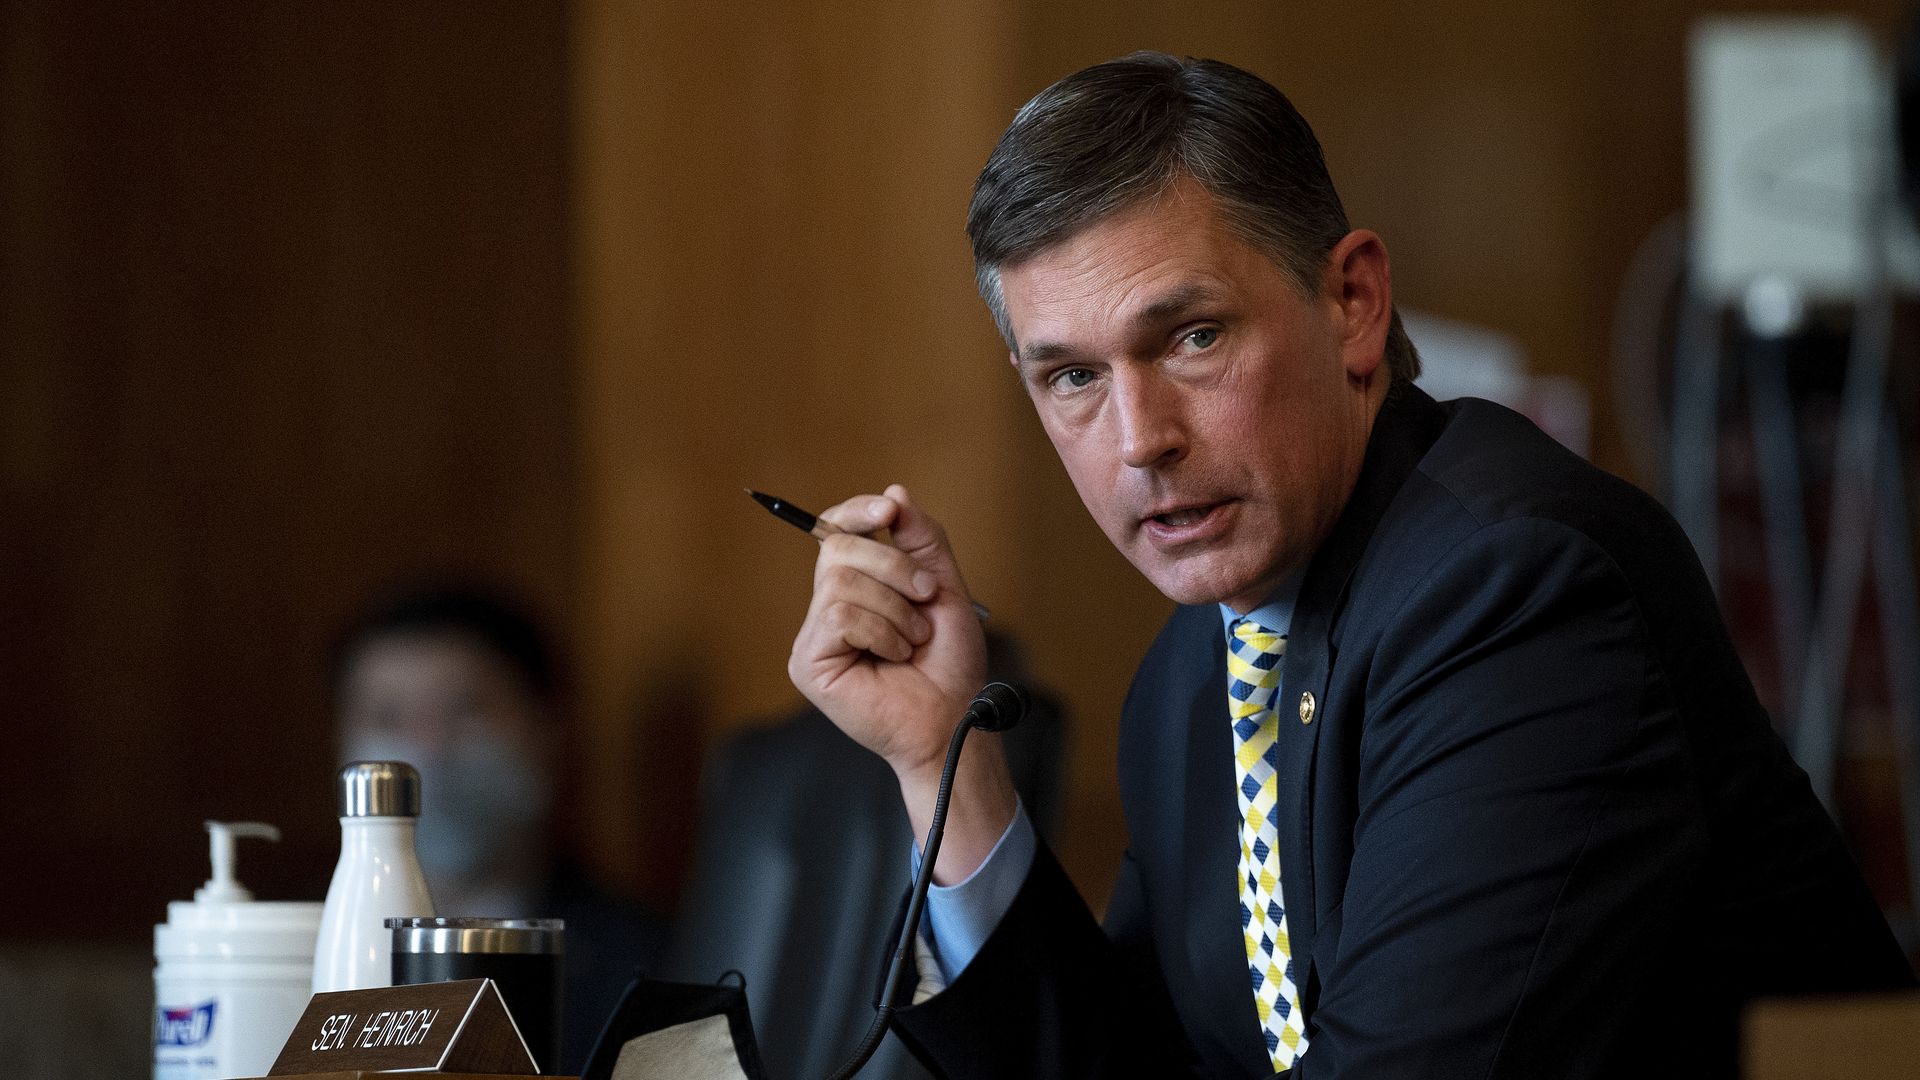 US Sen. Martin Heinrich, D-New Mexico, questions Rep. Deb Haaland, D-NM, during a Senate committee hearing on her nomination to be Interior Secretary in Washington, DC.